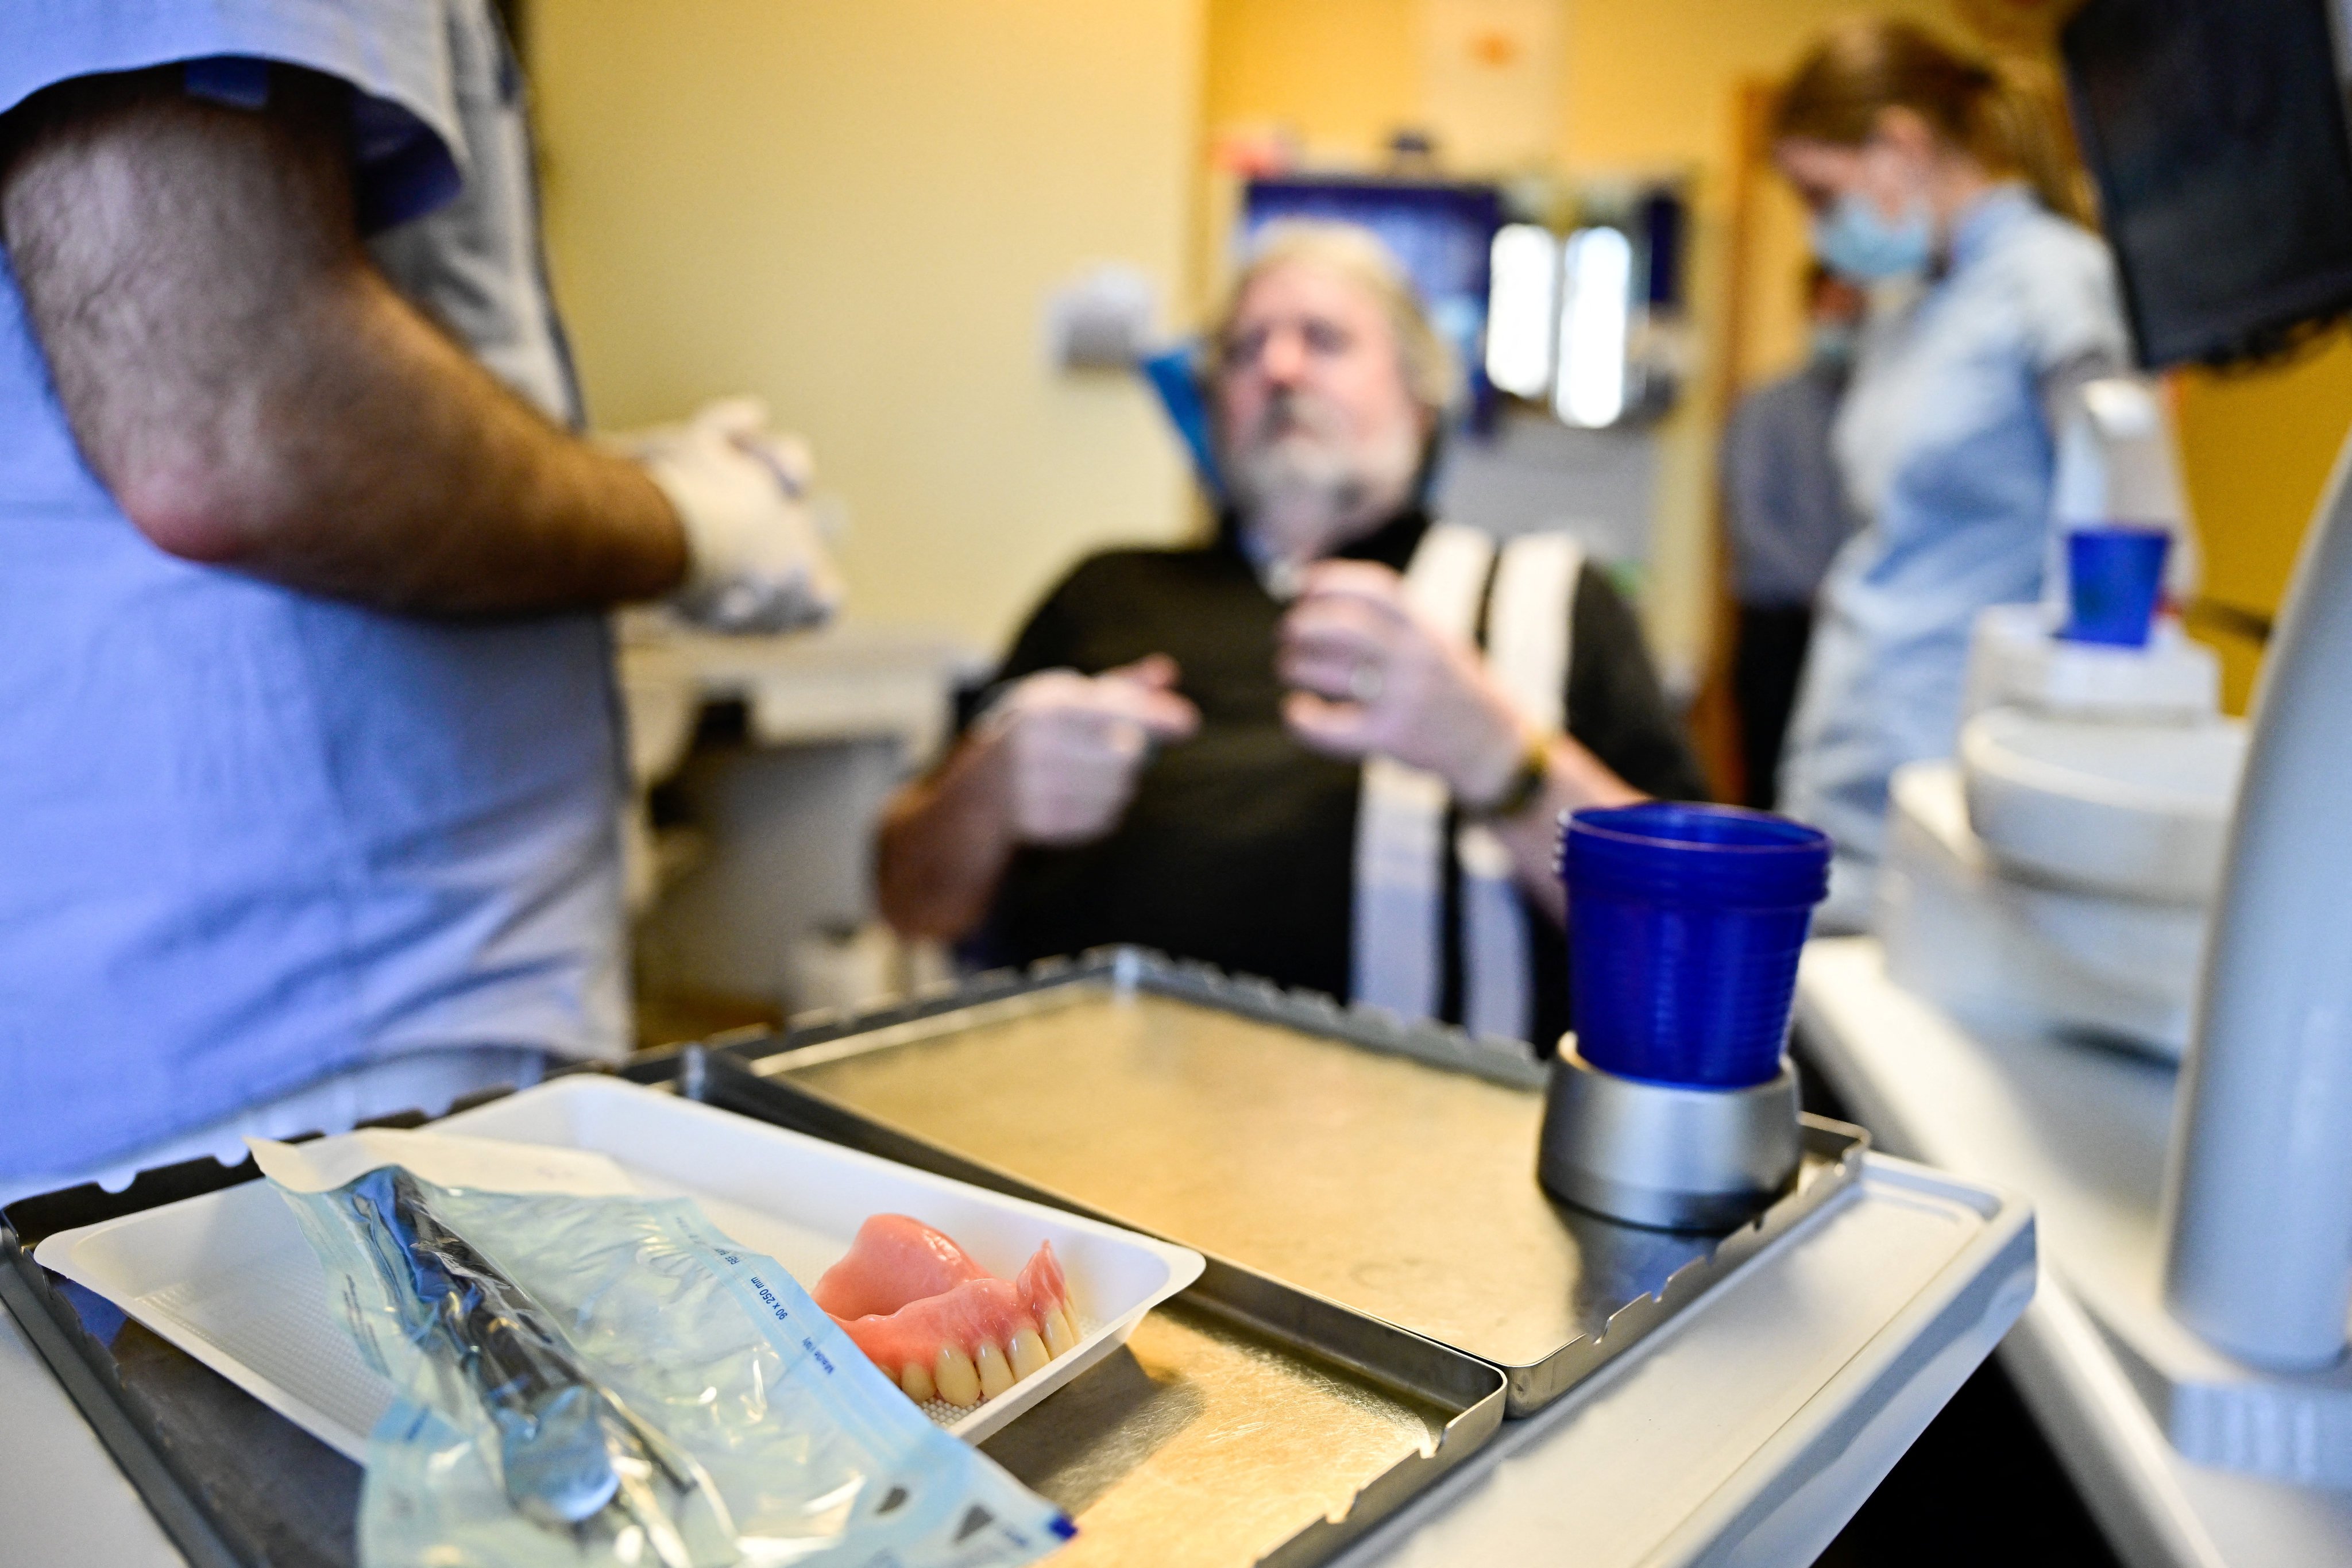 A British patient talks with a dentist during a check-up in Budapest. Photo: Reuters